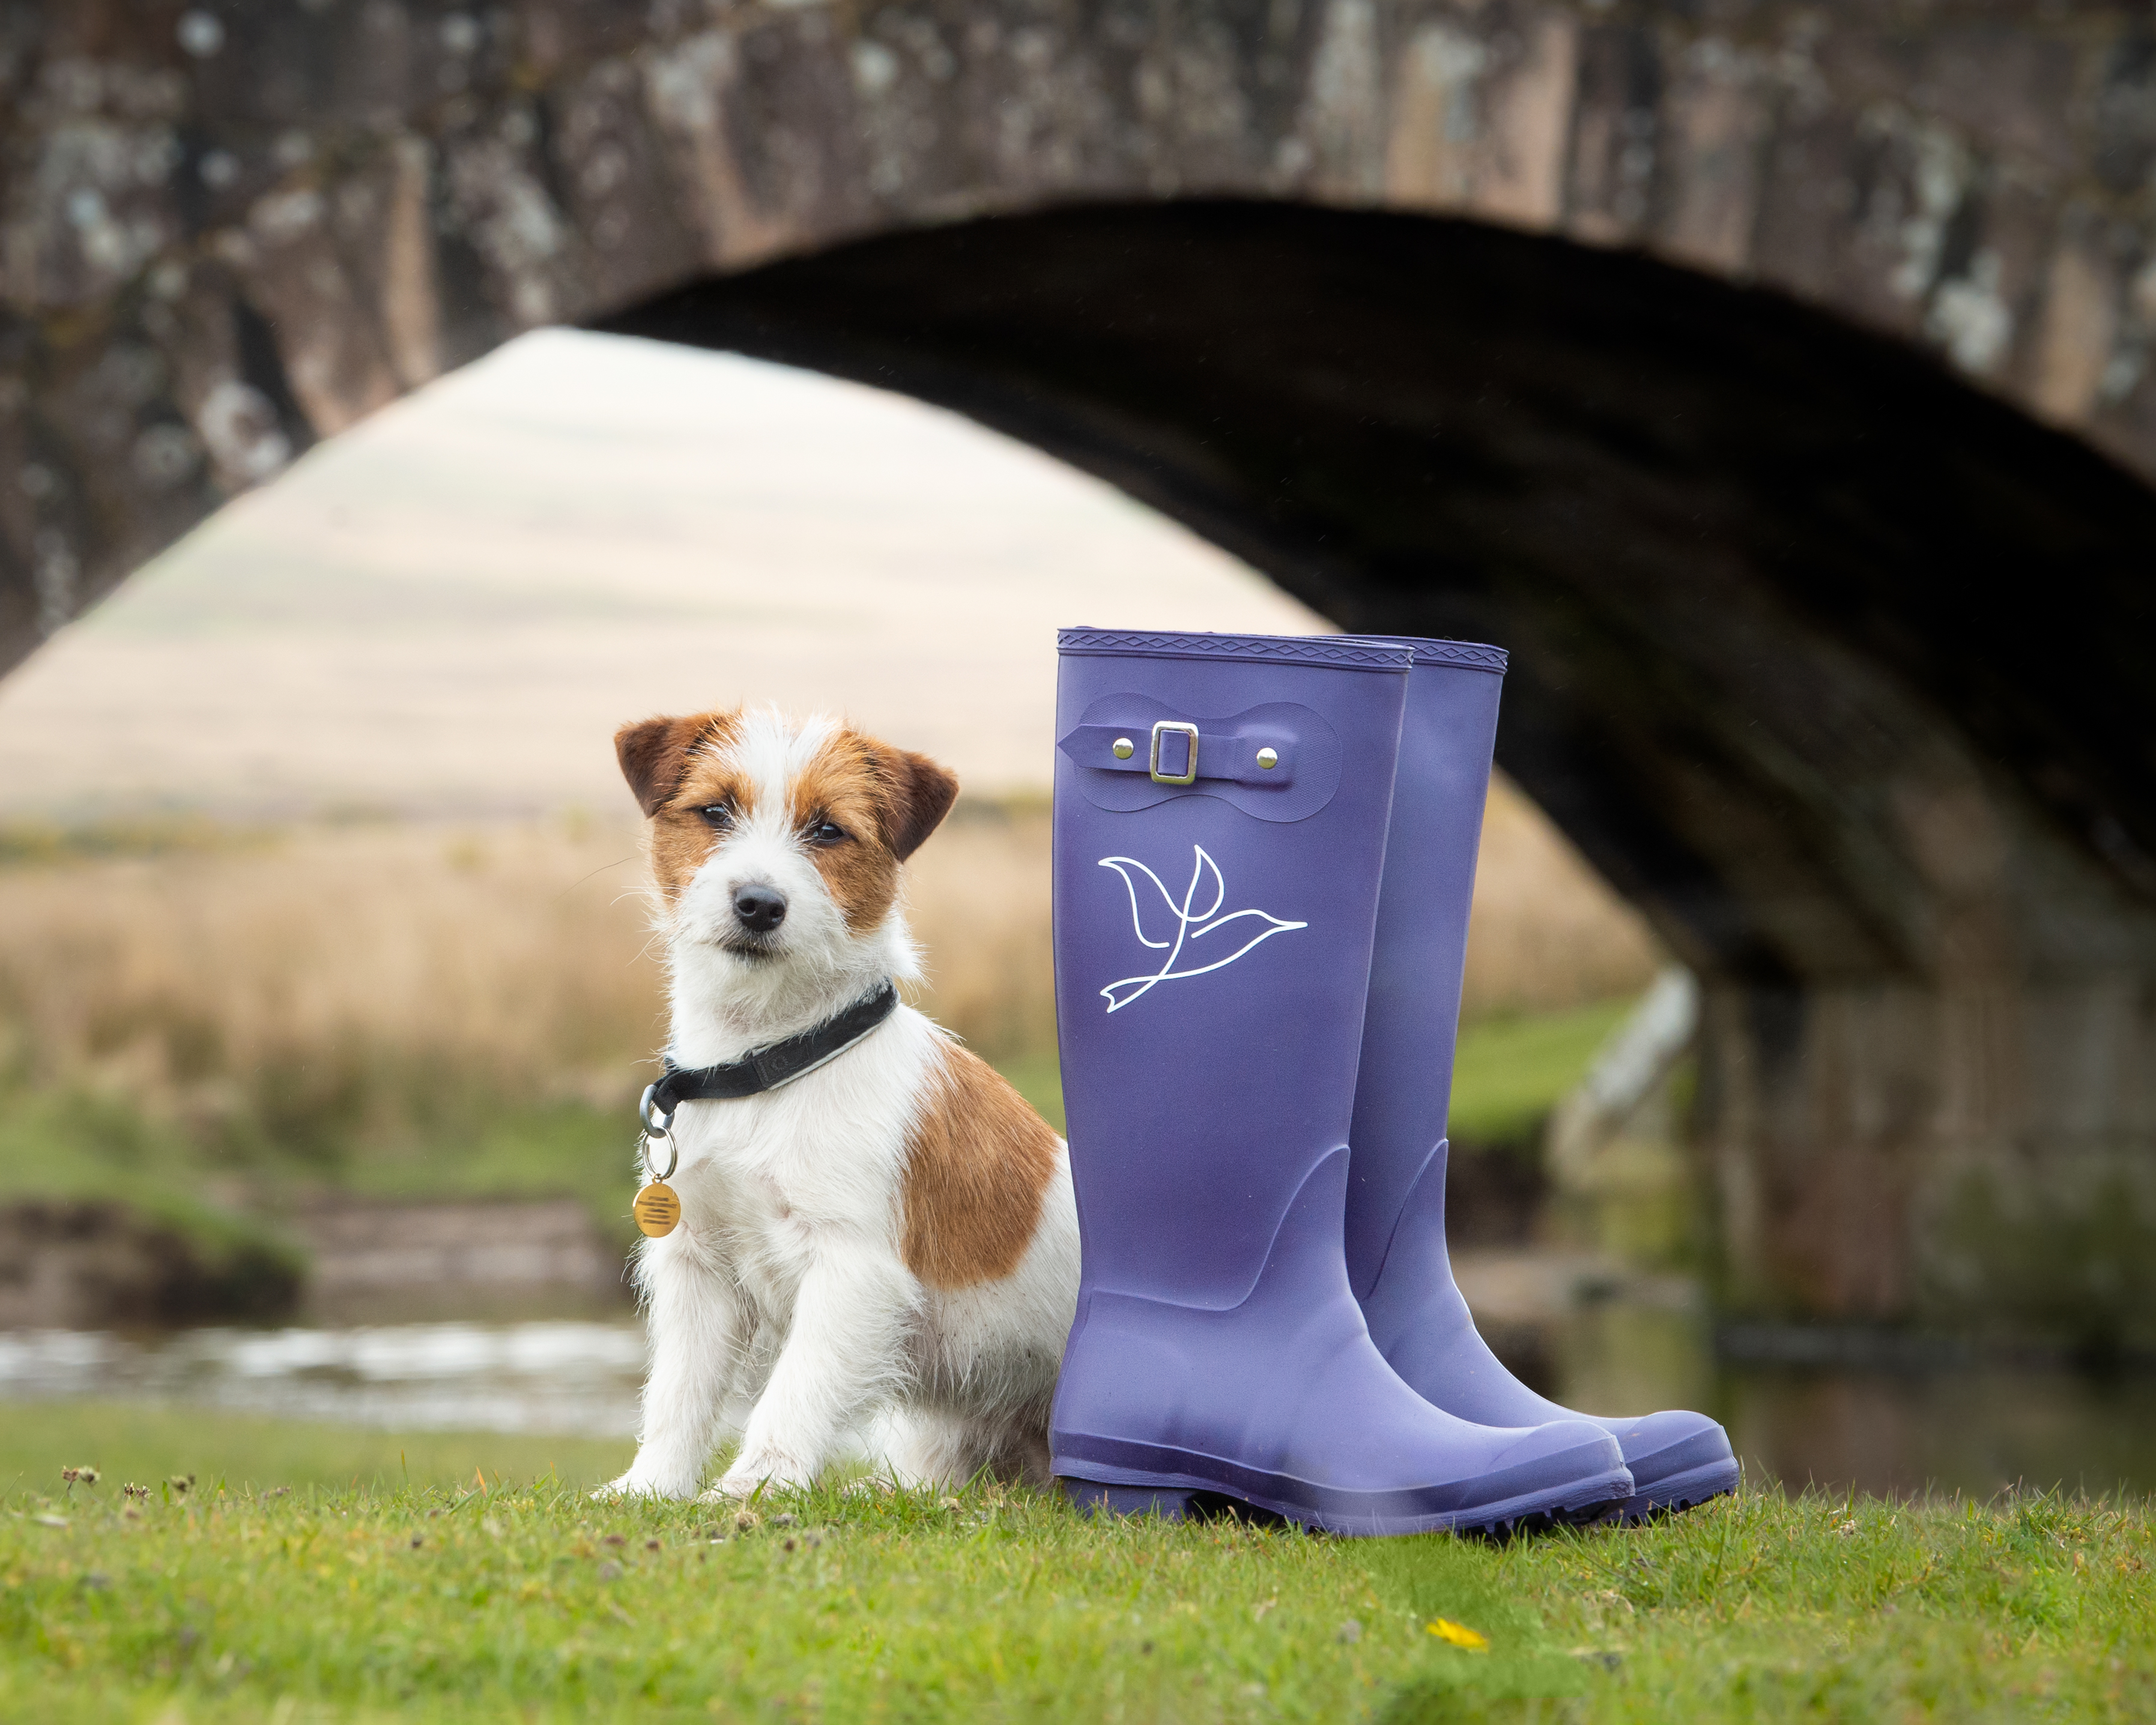 Jack russell terrier by a pair of purple wellies with the Wildanet logo